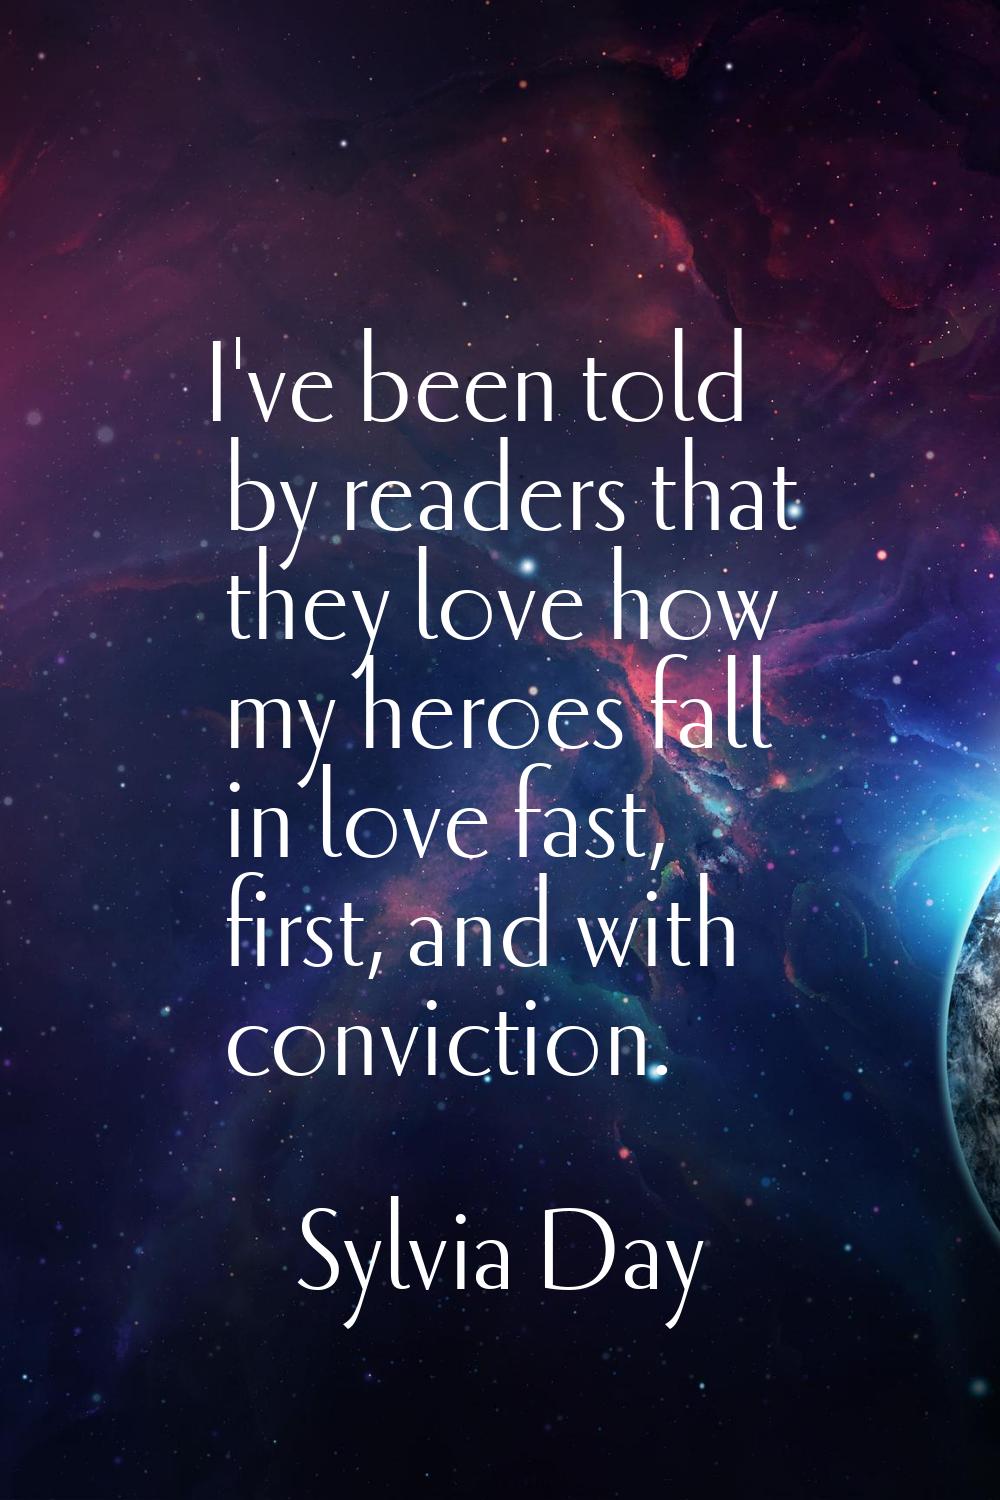 I've been told by readers that they love how my heroes fall in love fast, first, and with convictio